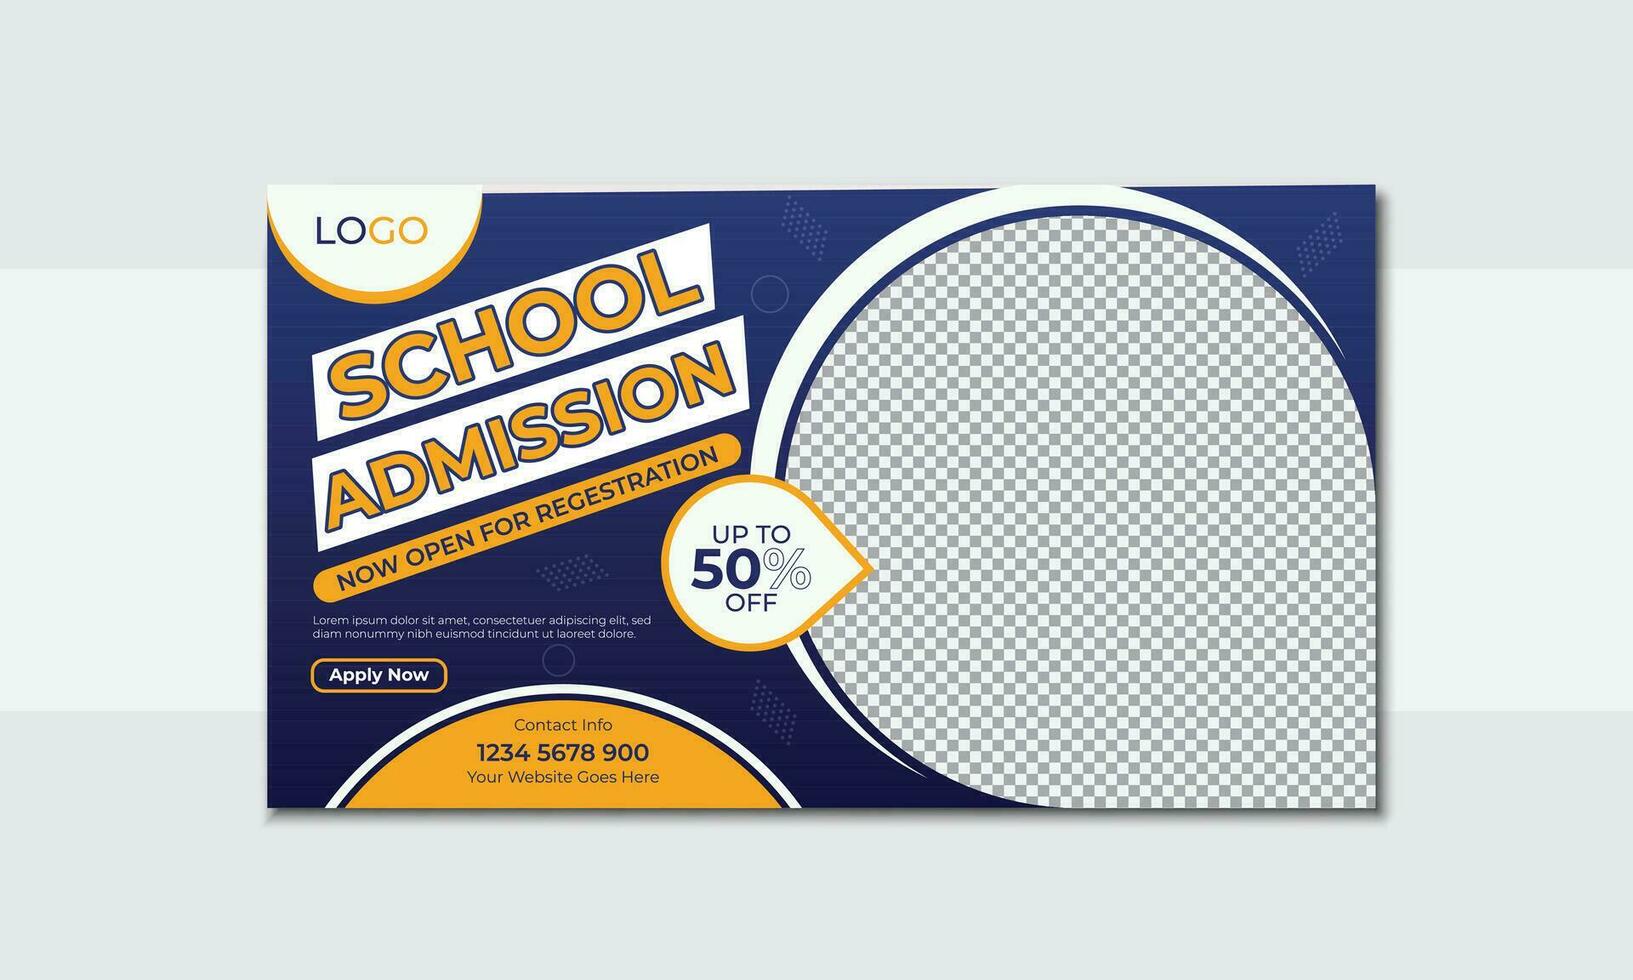 School education admission Video thumbnail or web banner template. vector